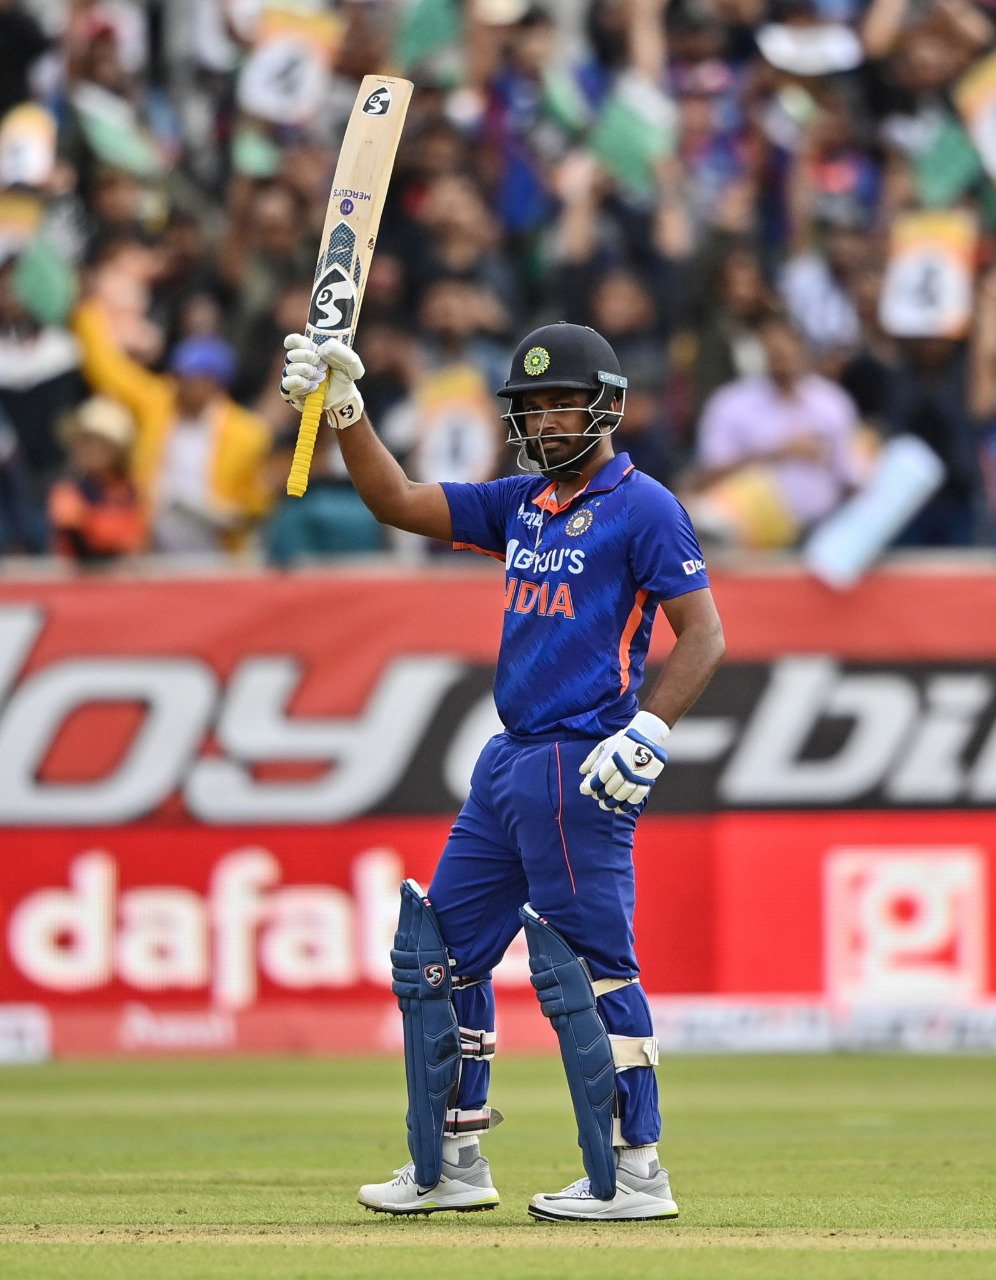 IND vs WI LIVE: On BORROWED TIME, Sanju Samson smashes maiden ODI FIFTY to silent CRITICS: Watch Highlights